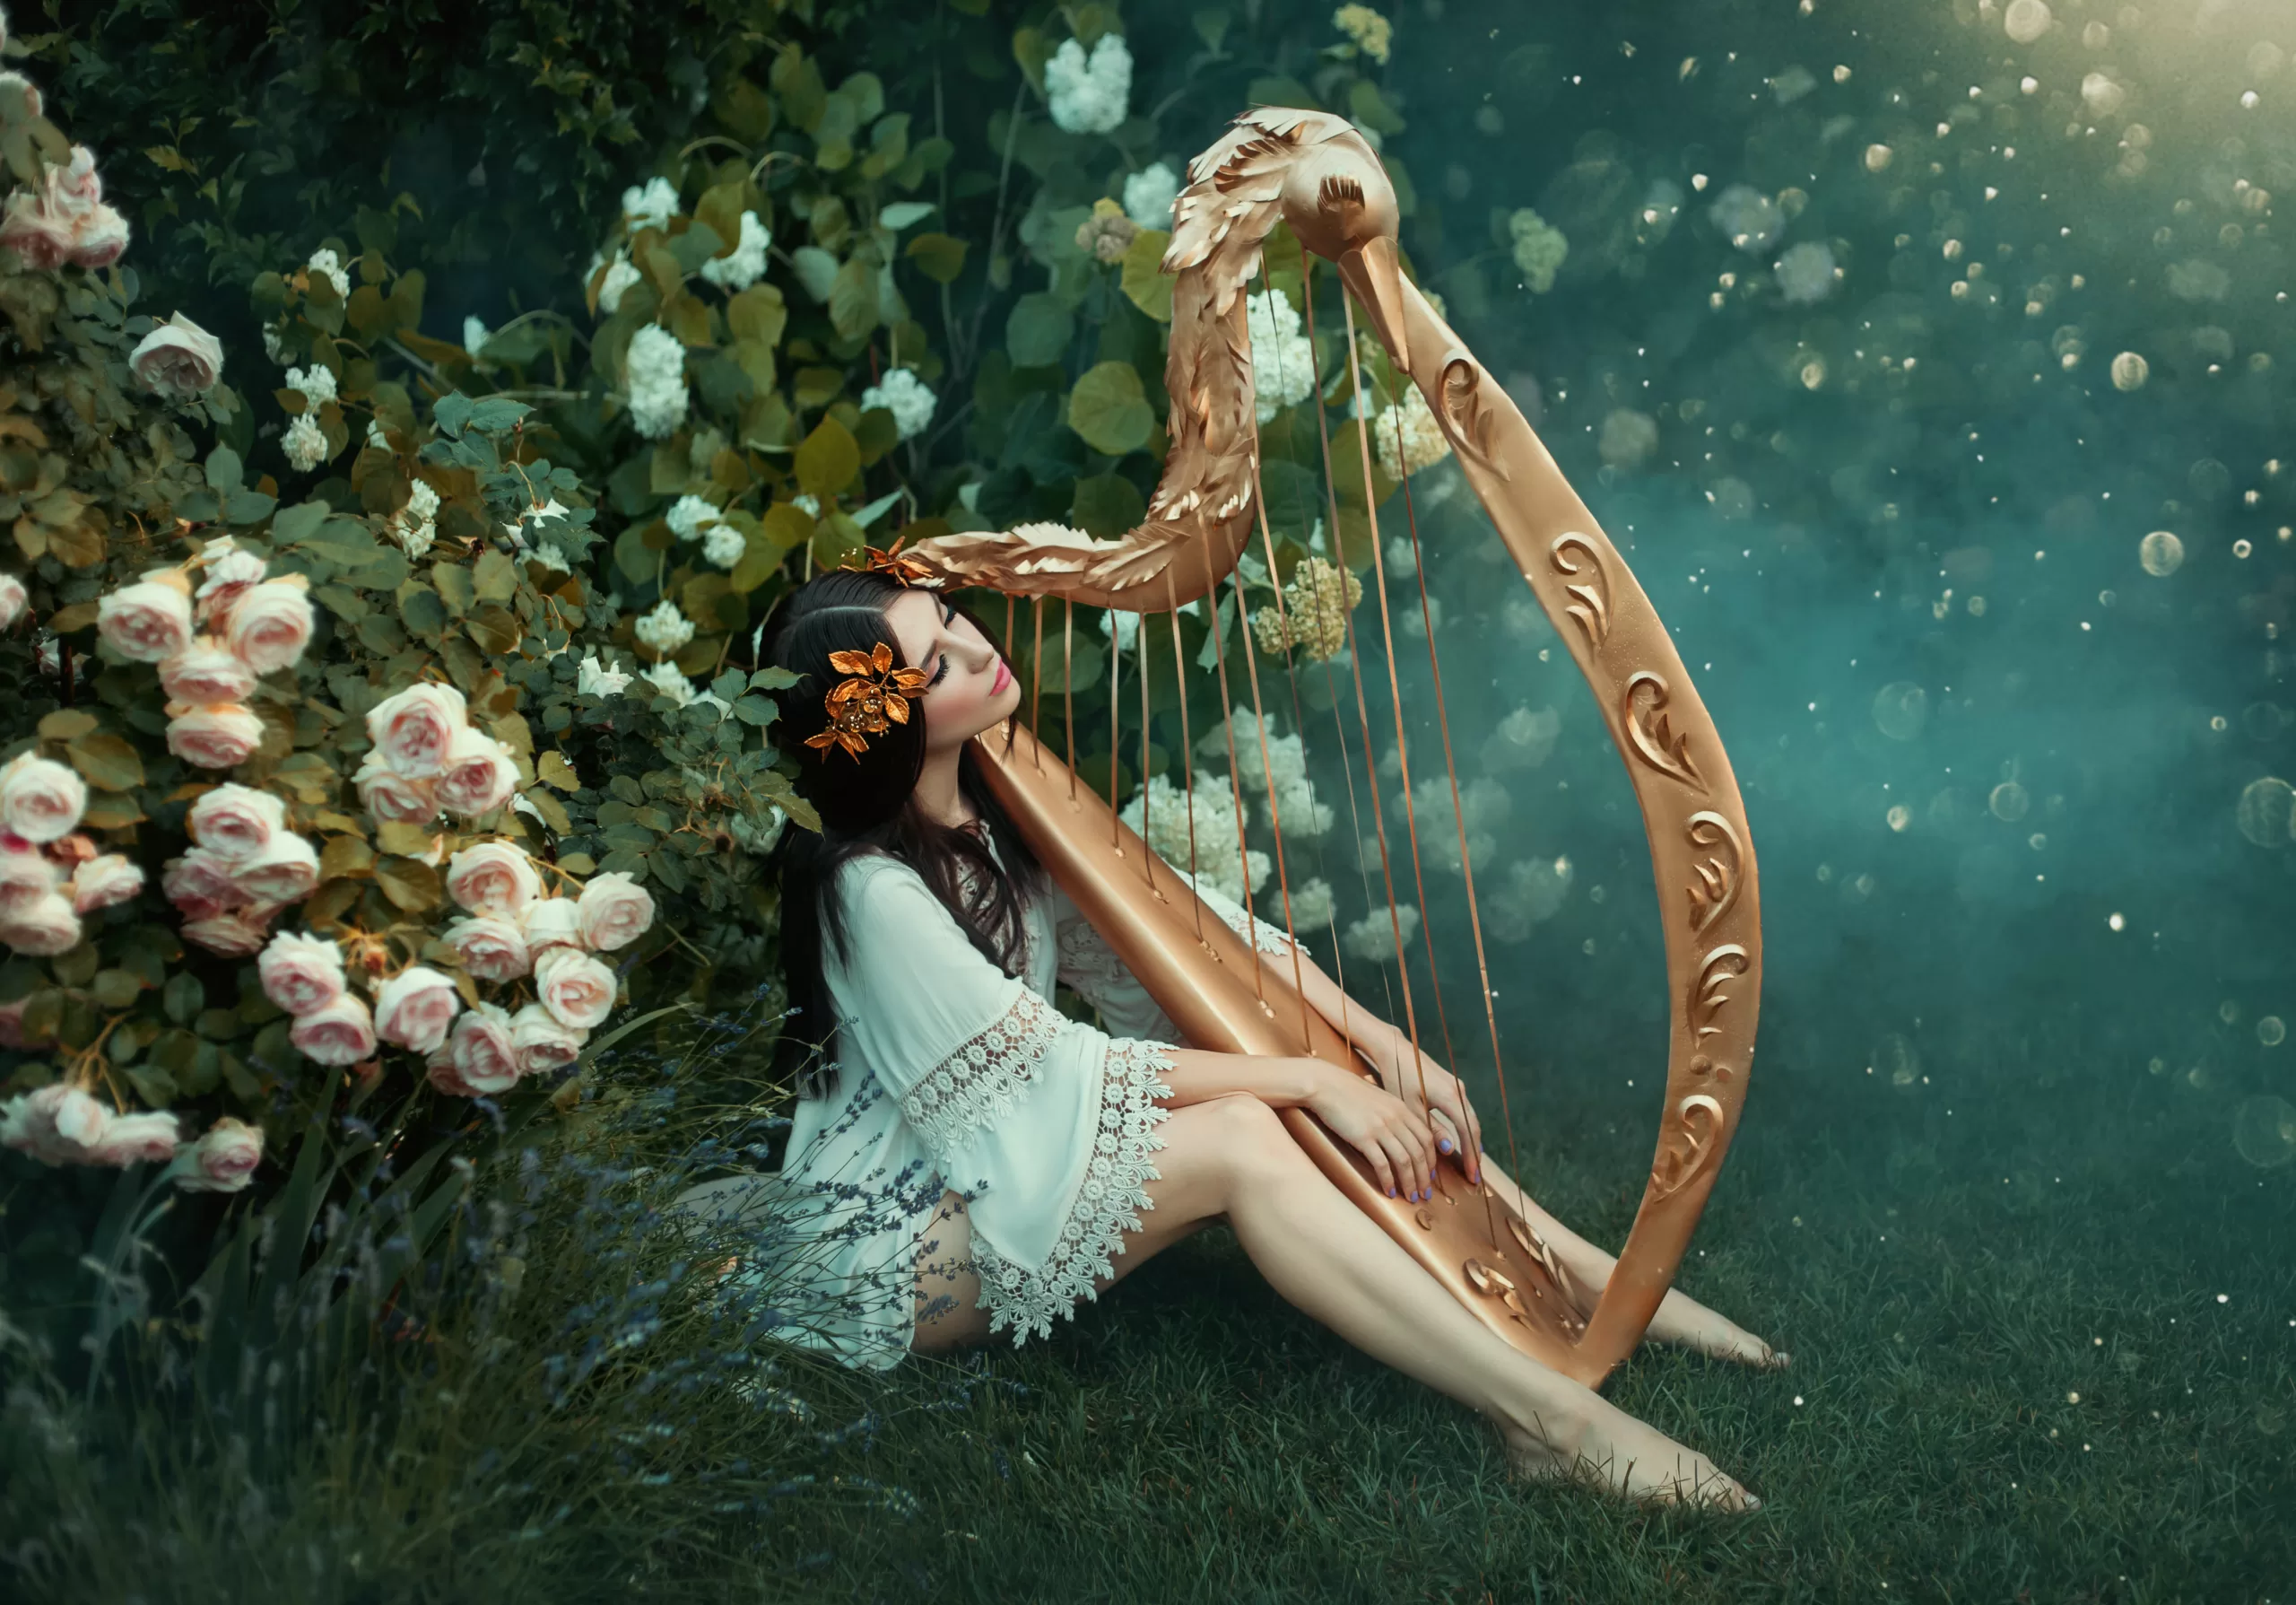 charming lady with dark black hair sits on the frozen grass alone with light white fog, forest nymph with haze plays harp, girl in simple shirt and with bare legs near rose bush, creative photo